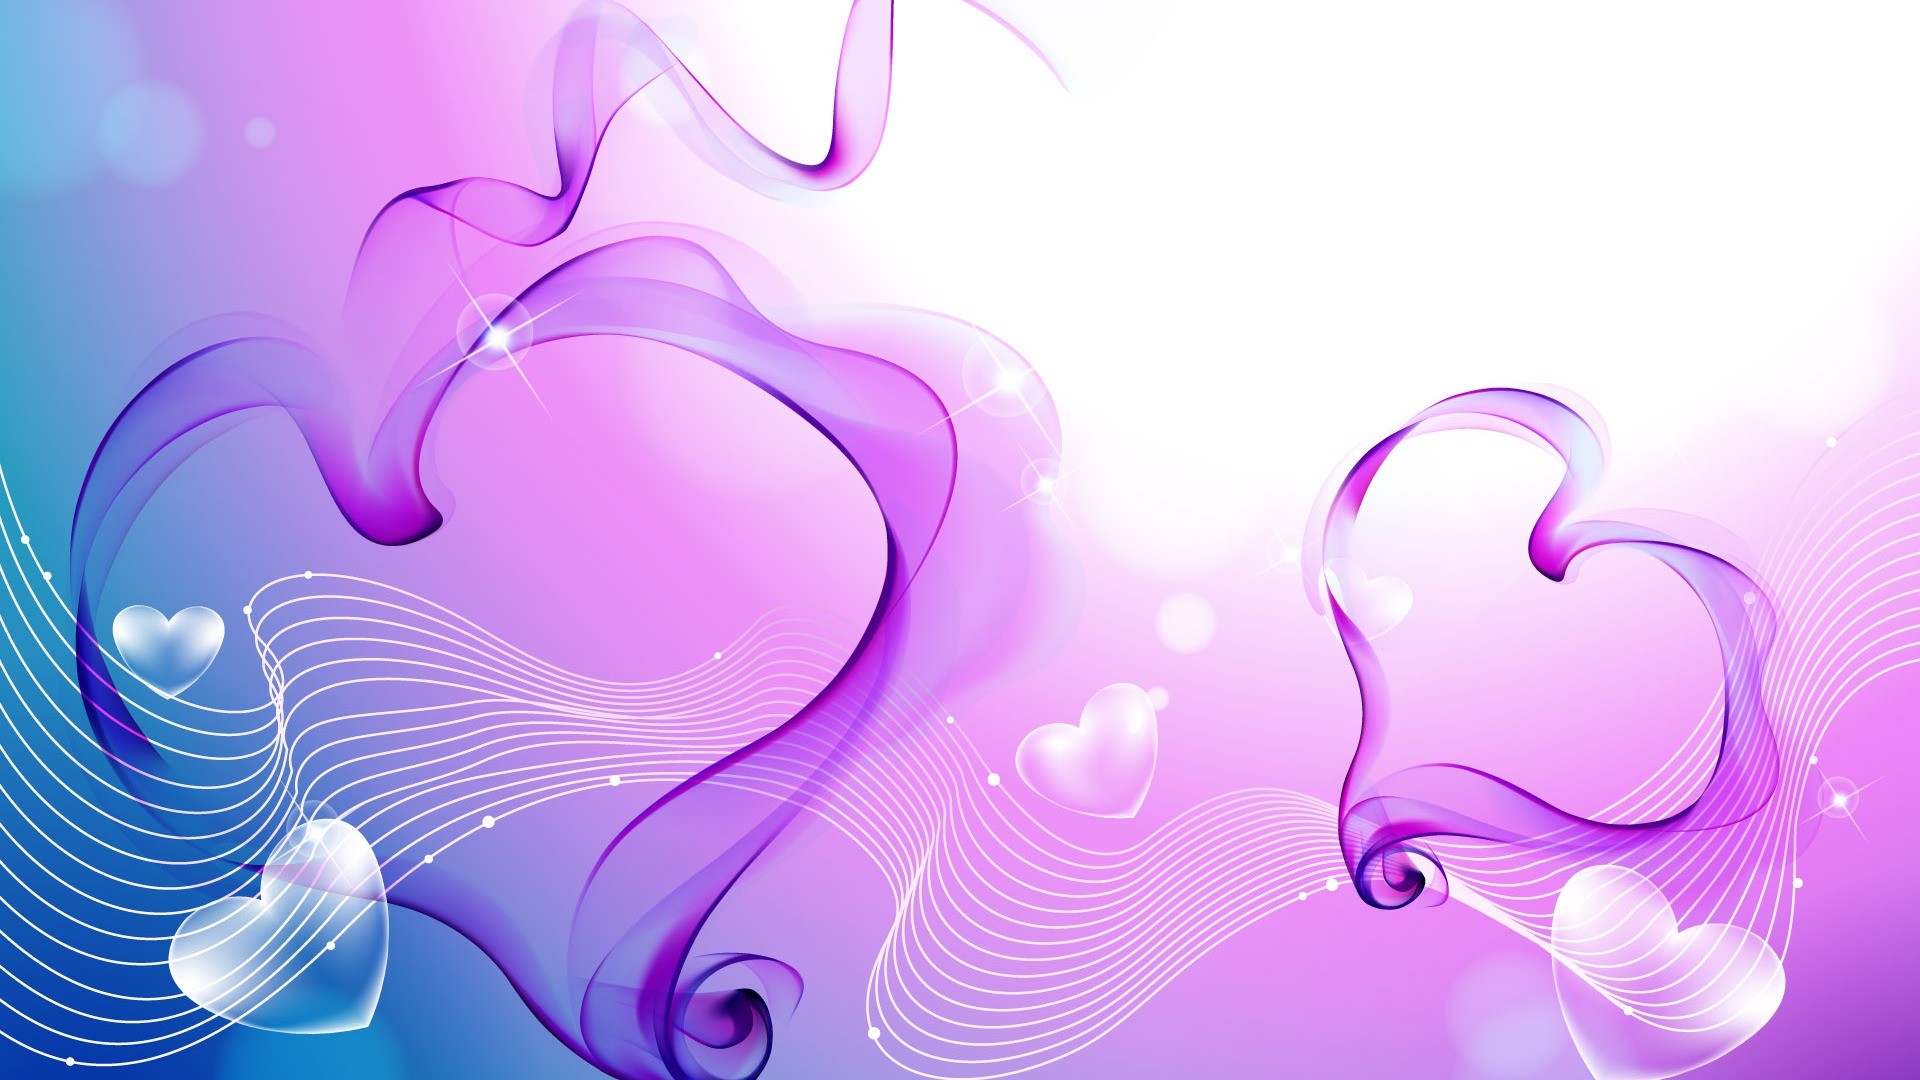 Cool Backgrounds with Abstract Love Shape in Purple